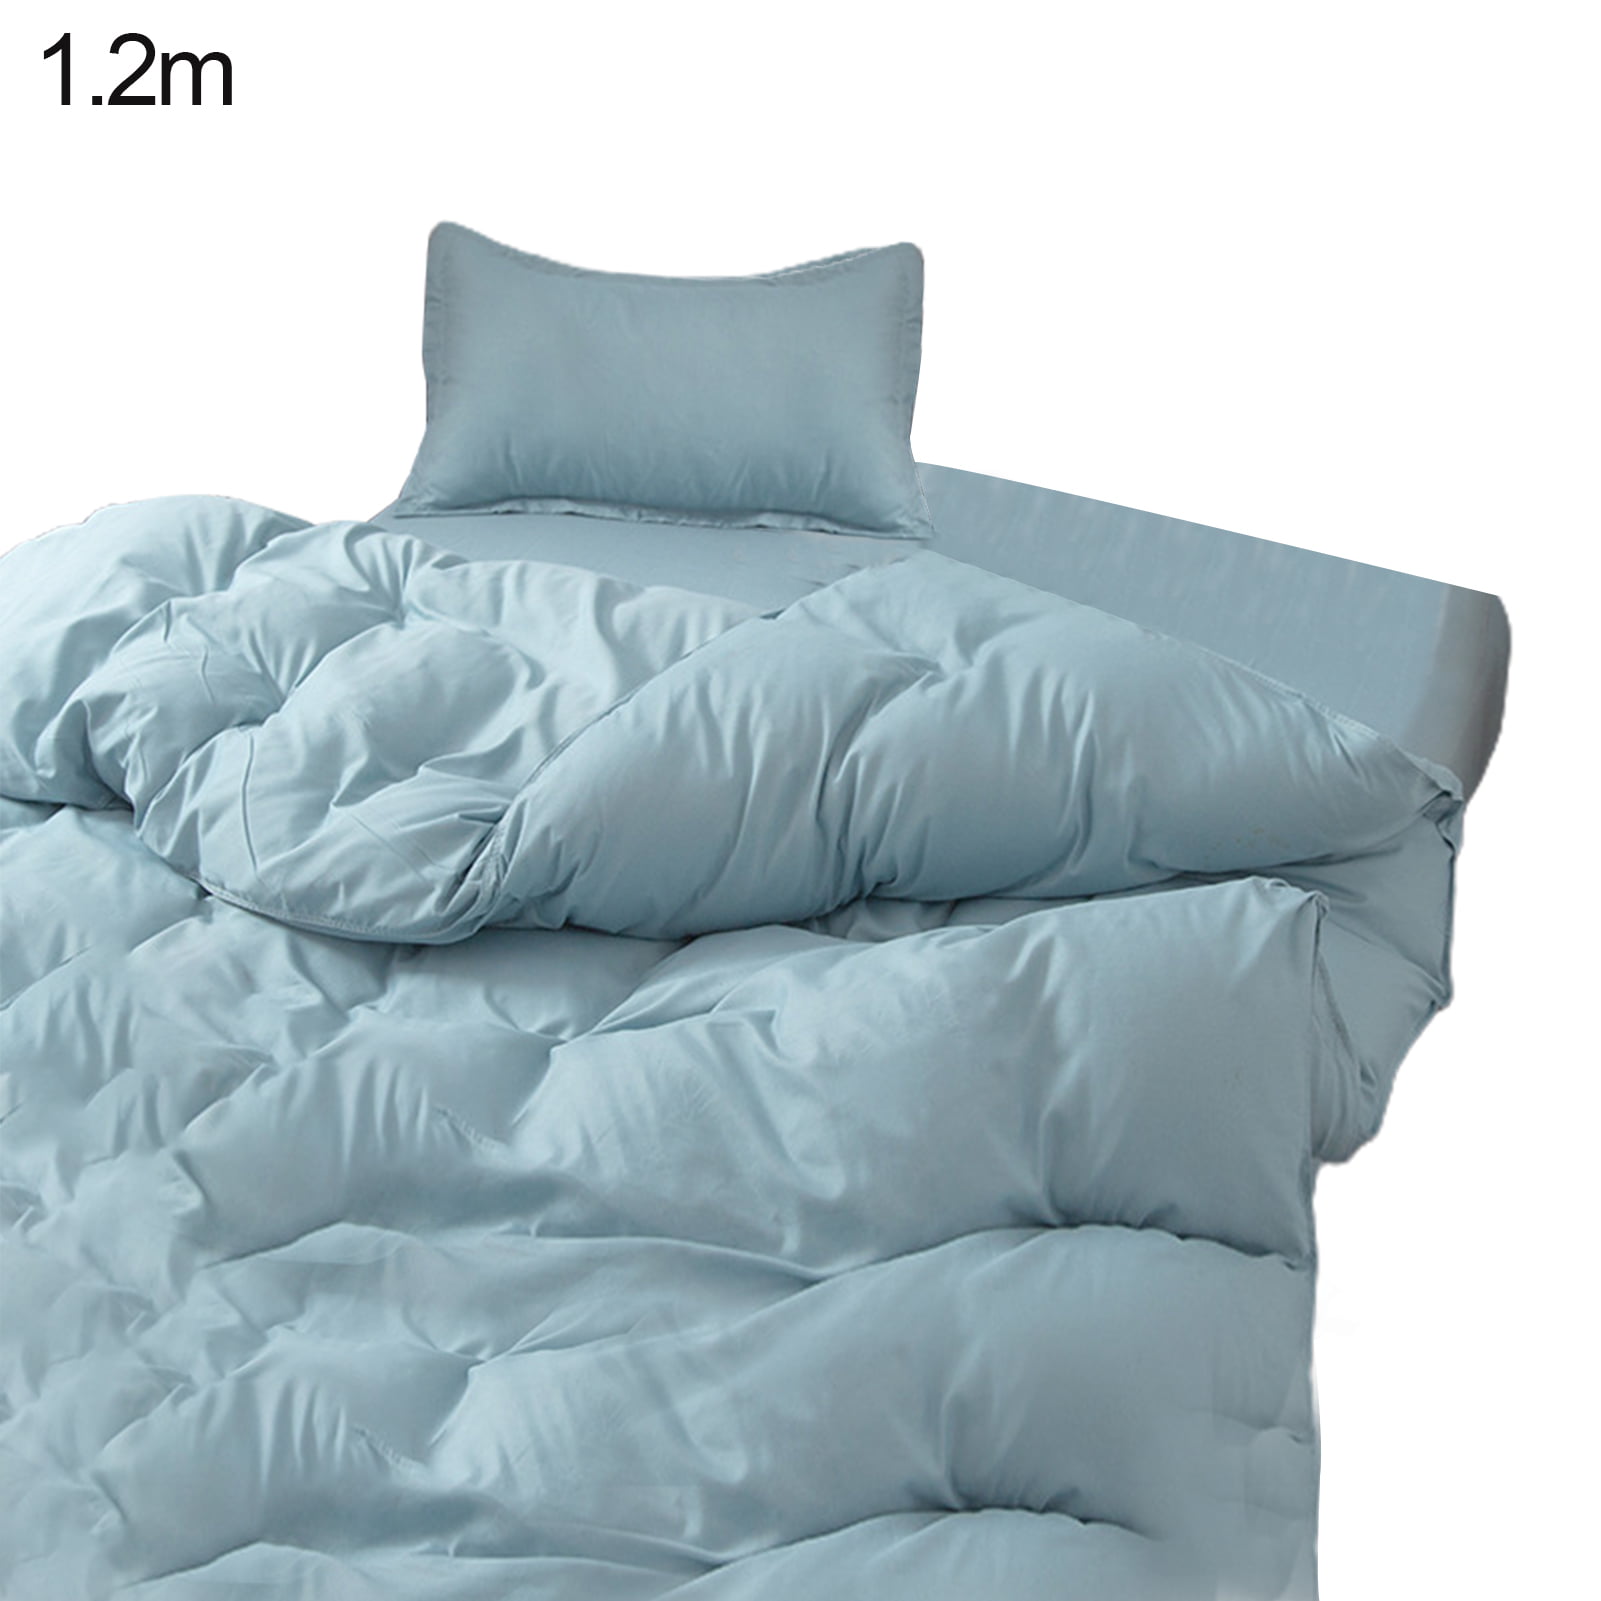 Details about   4pcs Bed Cover Set Duvet Cover Bed Sheet and Pillowcase Comforter Bedding Set 